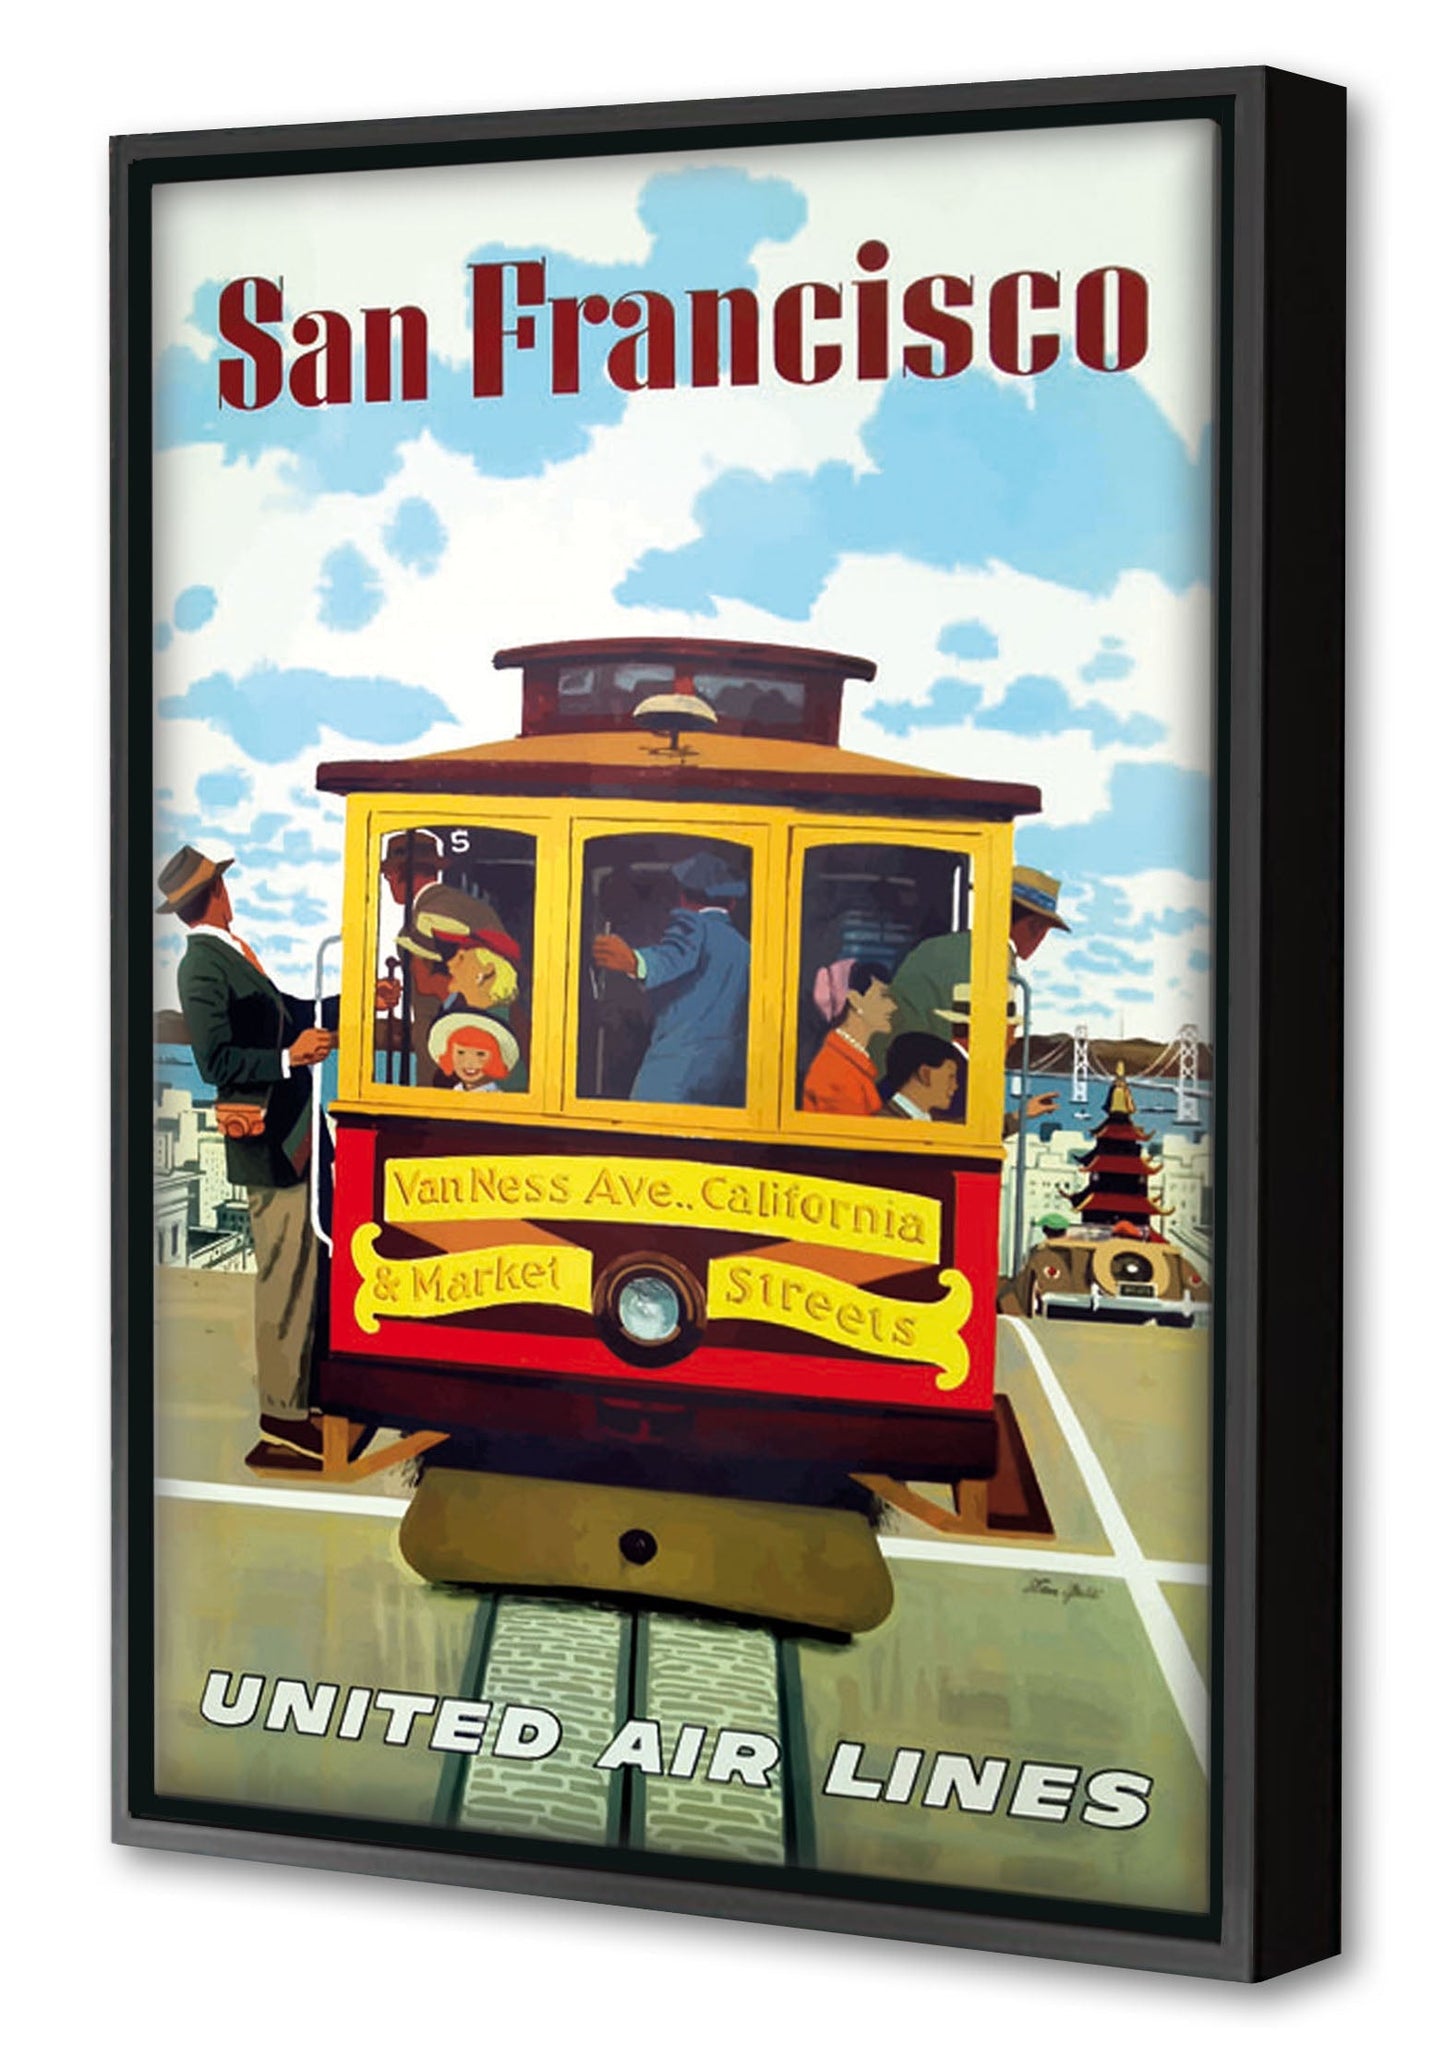 San Francisco United Airlines (Tramway)-airlines, print-Canvas Print with Box Frame-40 x 60 cm-BLUE SHAKER